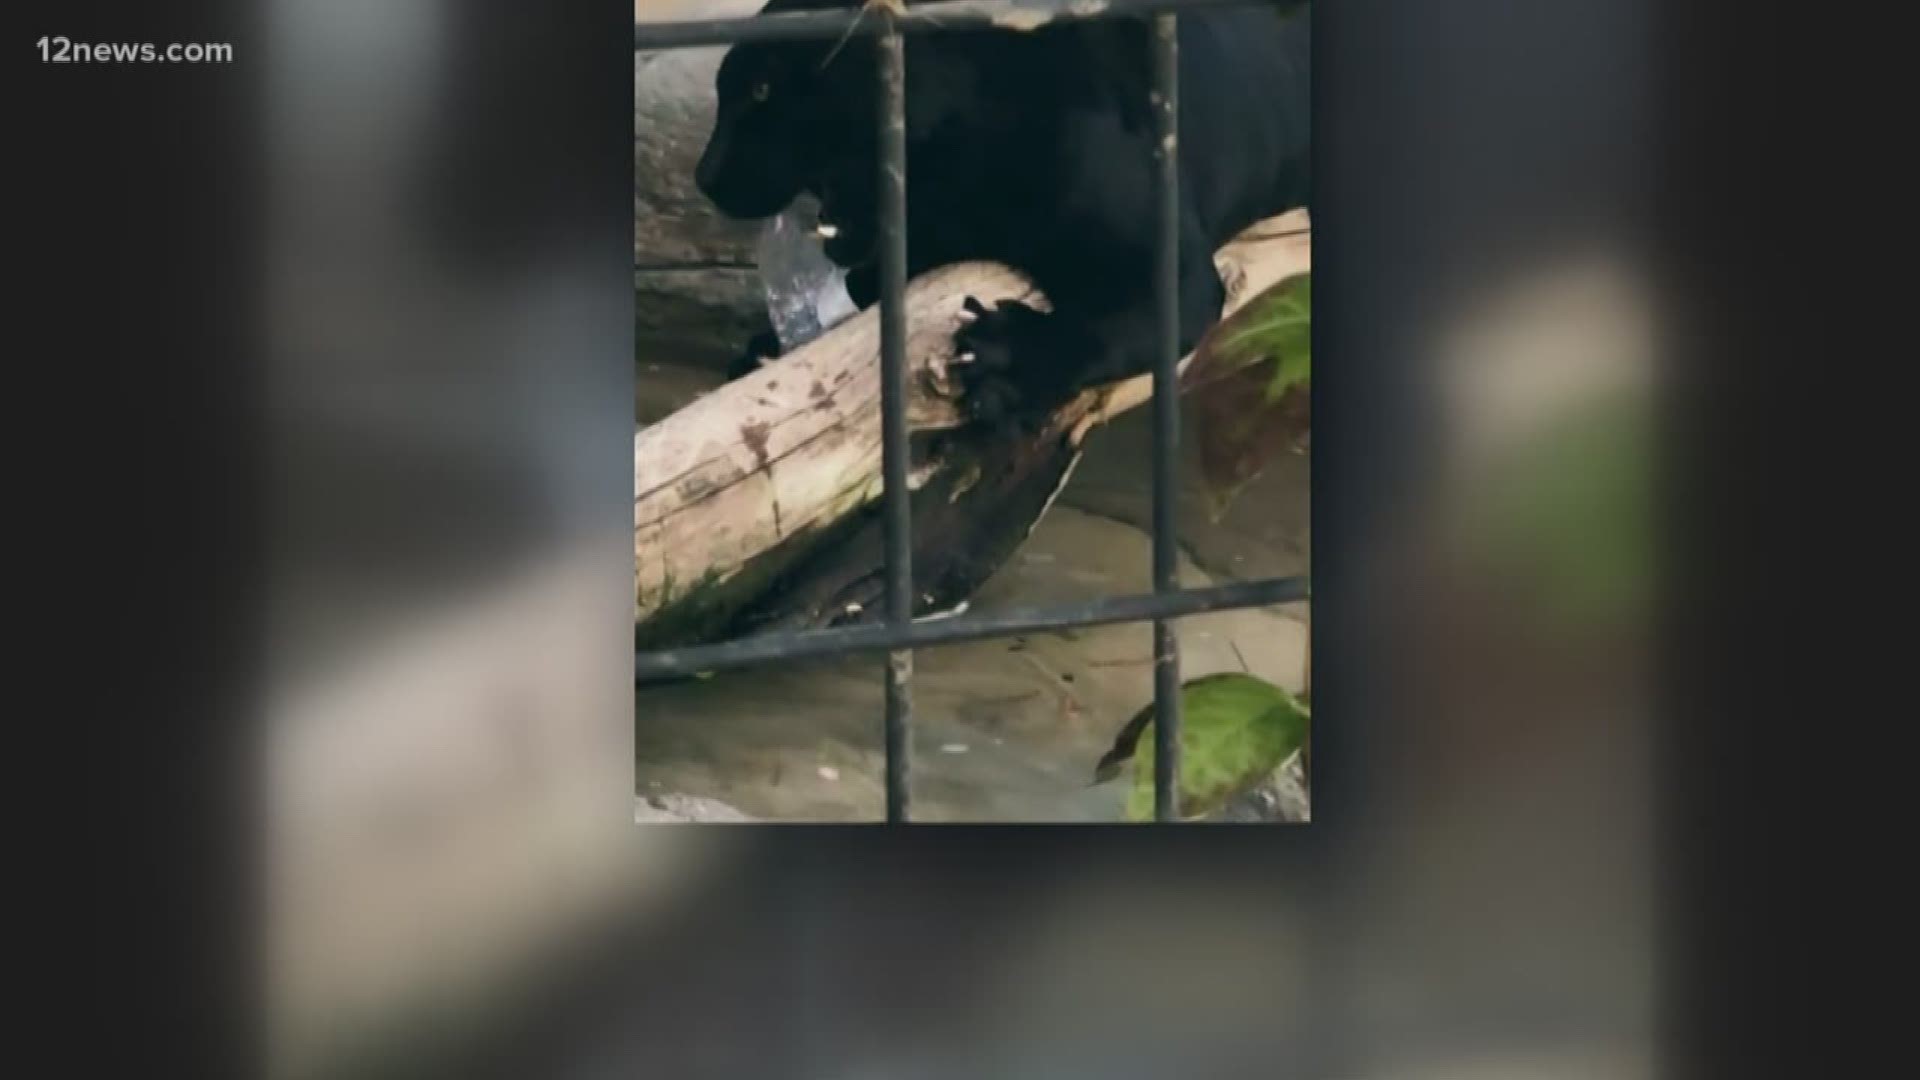 Over the weekend a jaguar at the Wildlife World Zoo attacked a woman who crossed a barrier near the jaguar's exhibit. This isn't the first time the jaguar has attacked a human, the previous time left a zookeeper in the hospital.